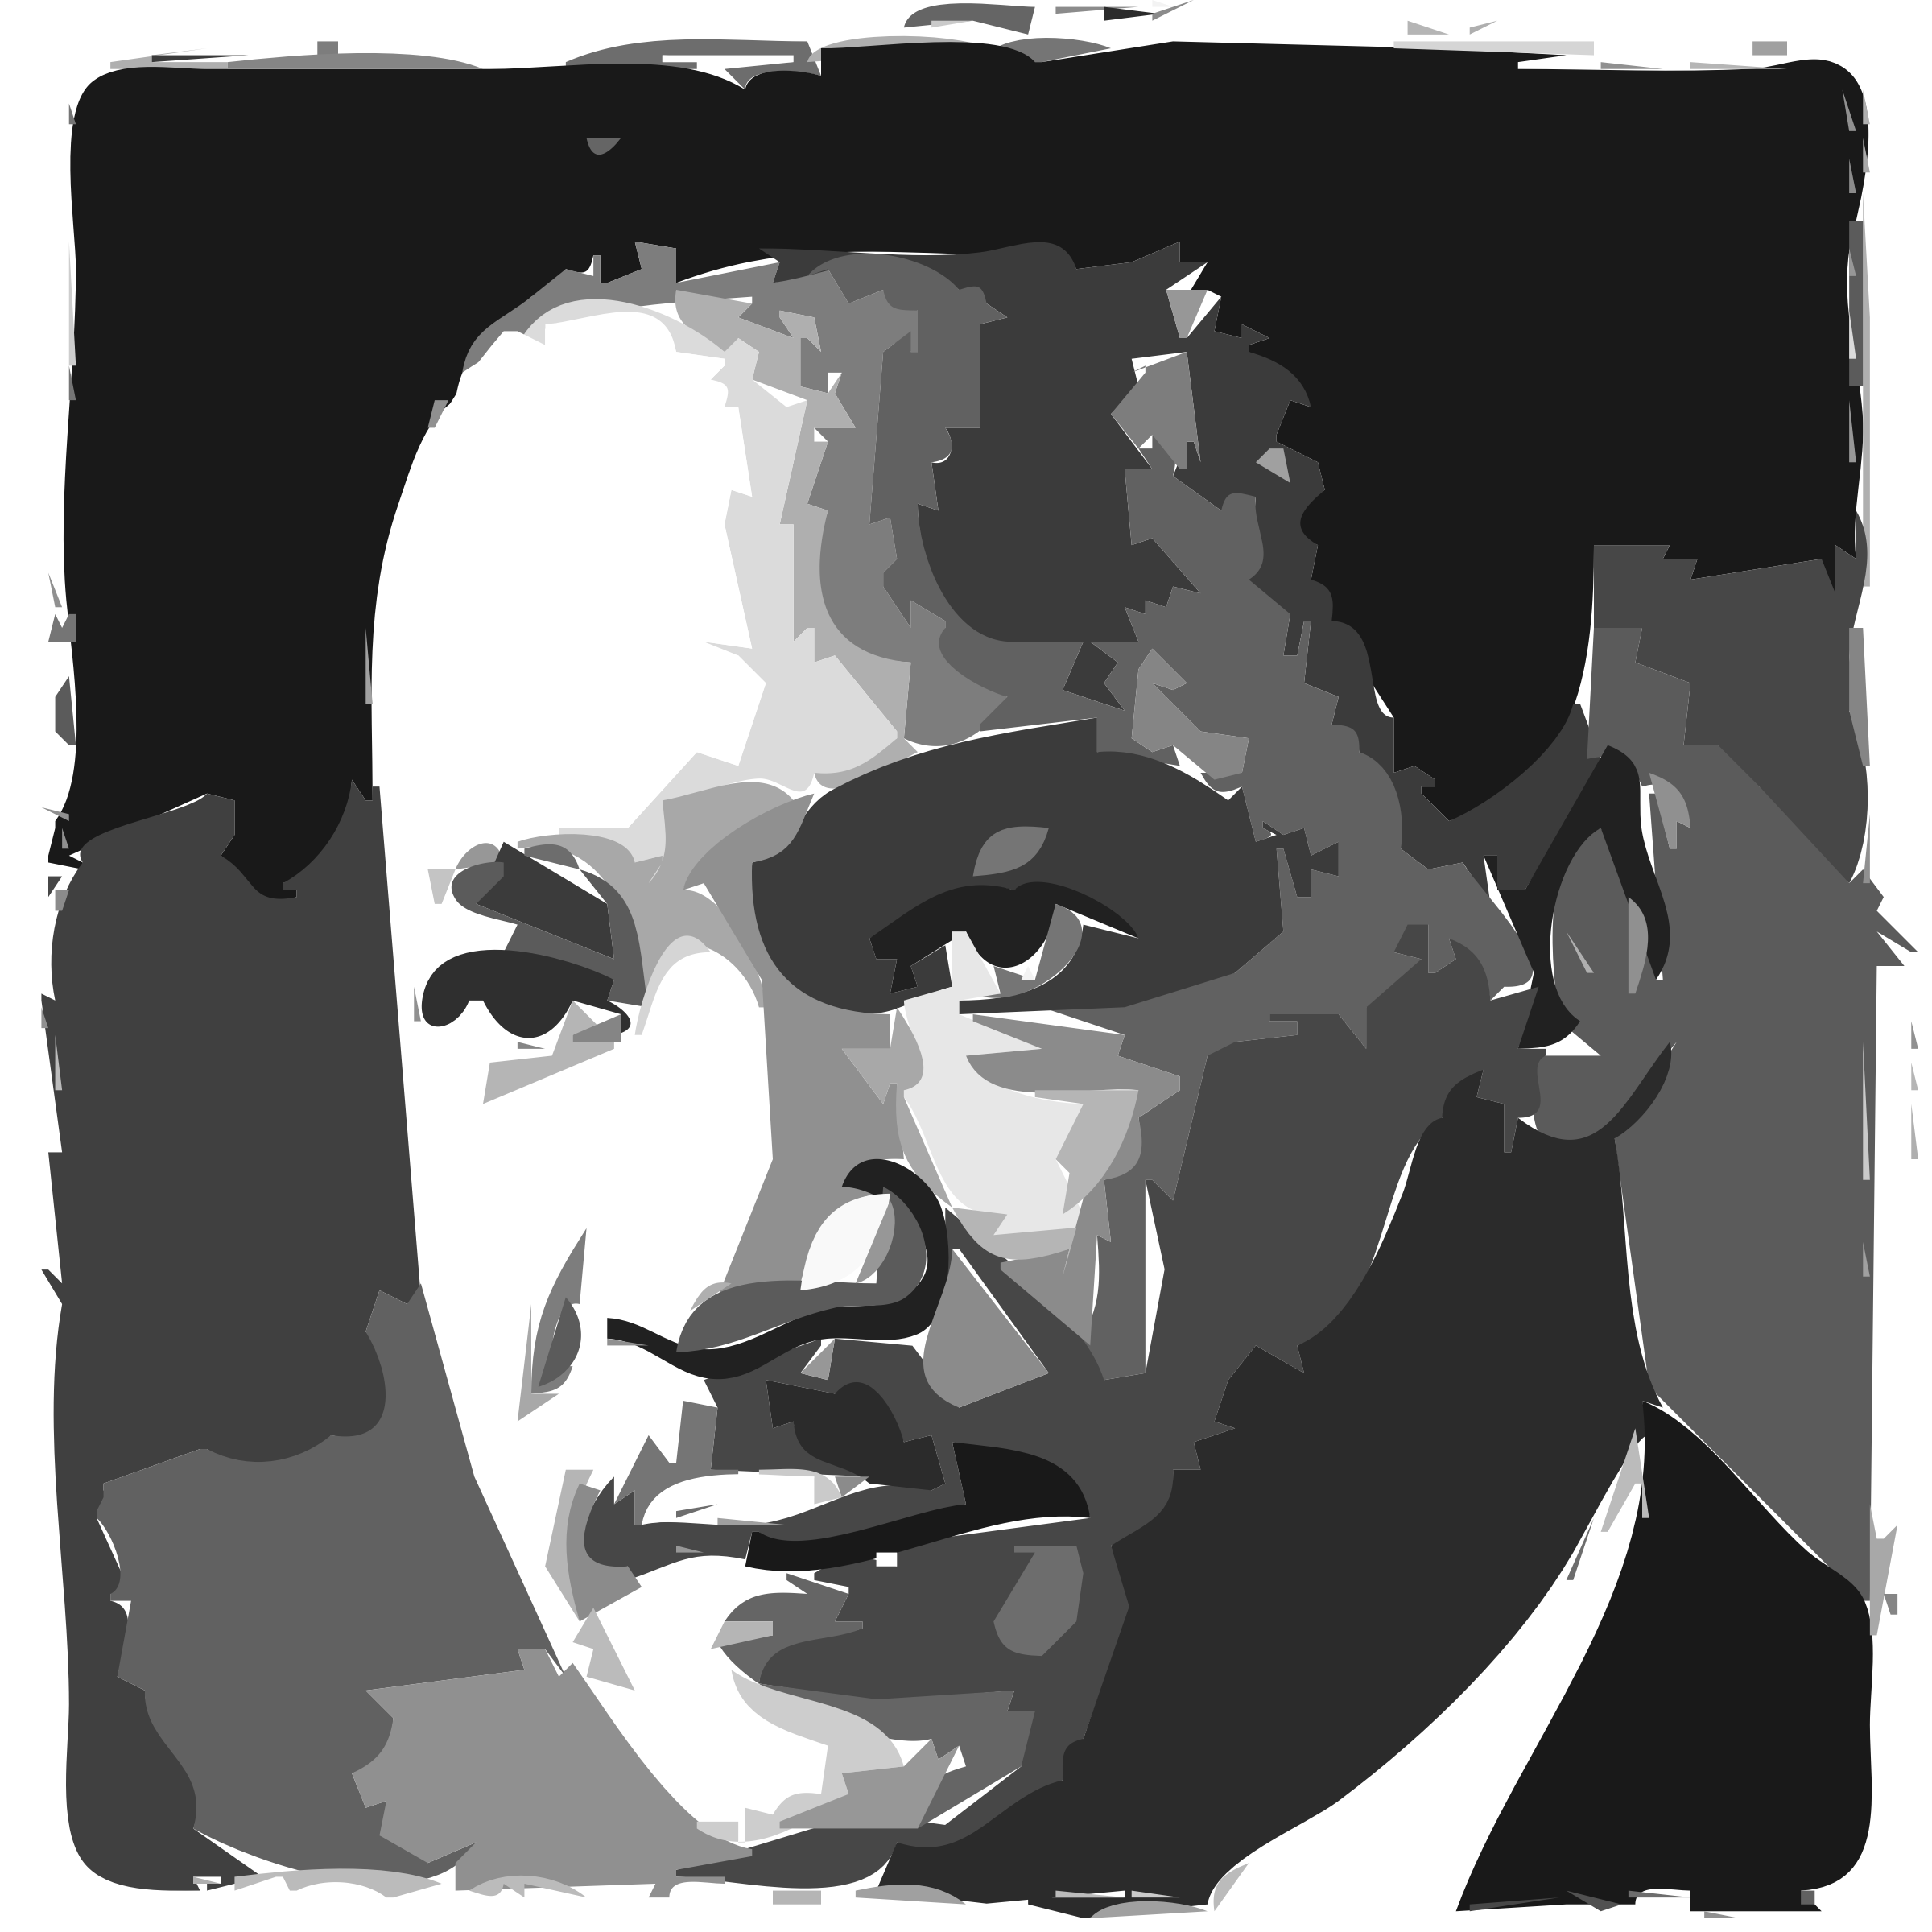 Martin-Luther-King-Jr-Day-2016011926.png